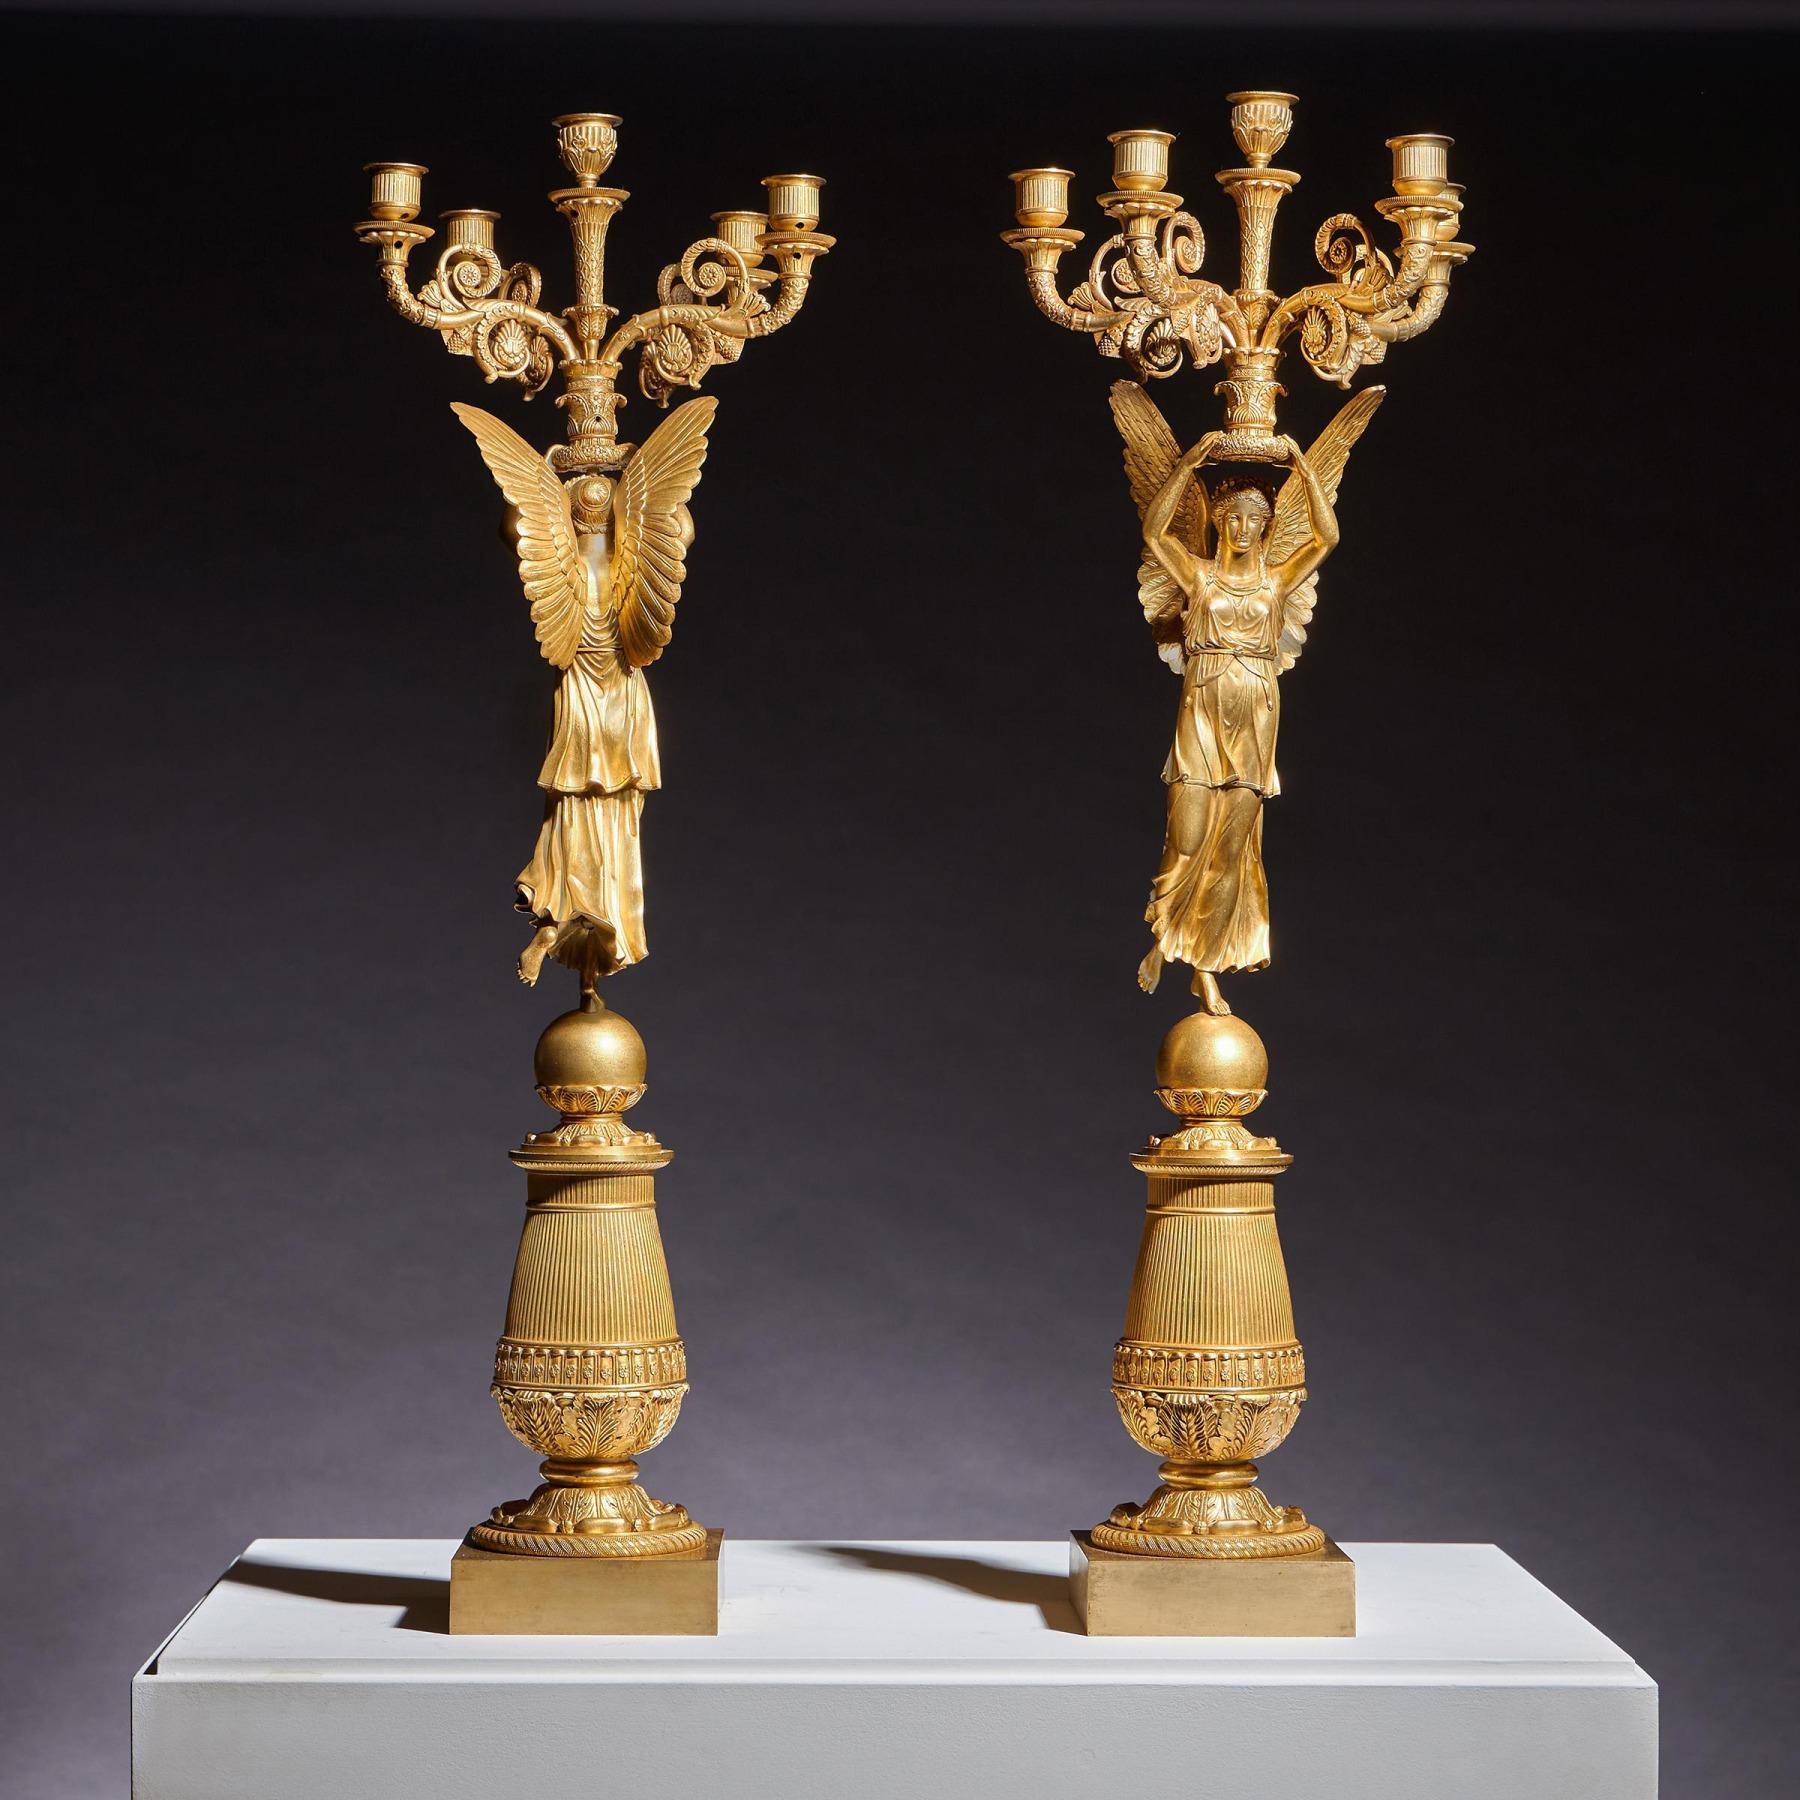 Early 19th Century Exceptional Pair of French Late Empire Gilt-bronze Candelabra Attributed to Pier For Sale